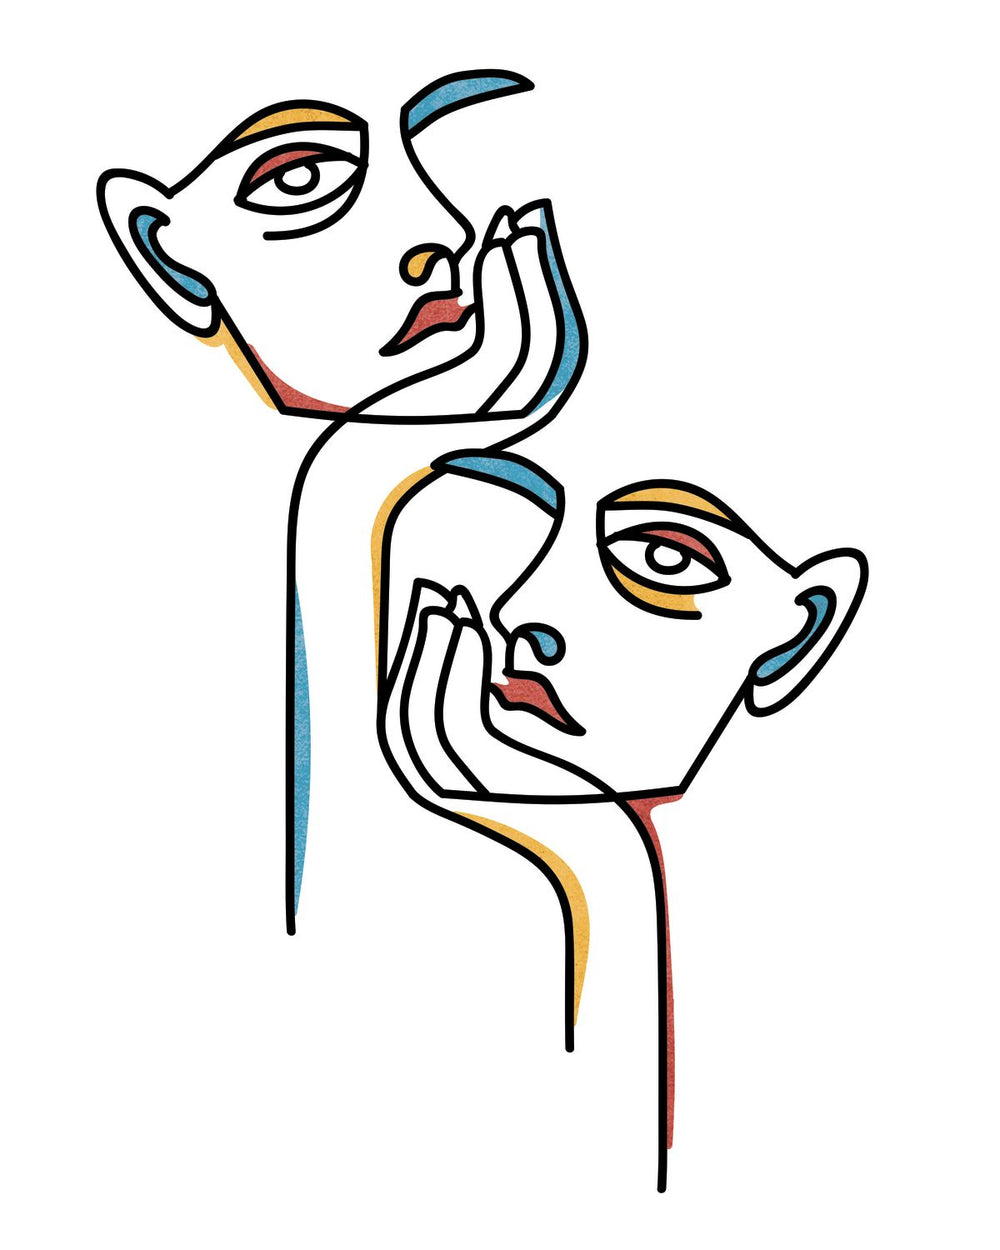 Contemplating Abstract Faces